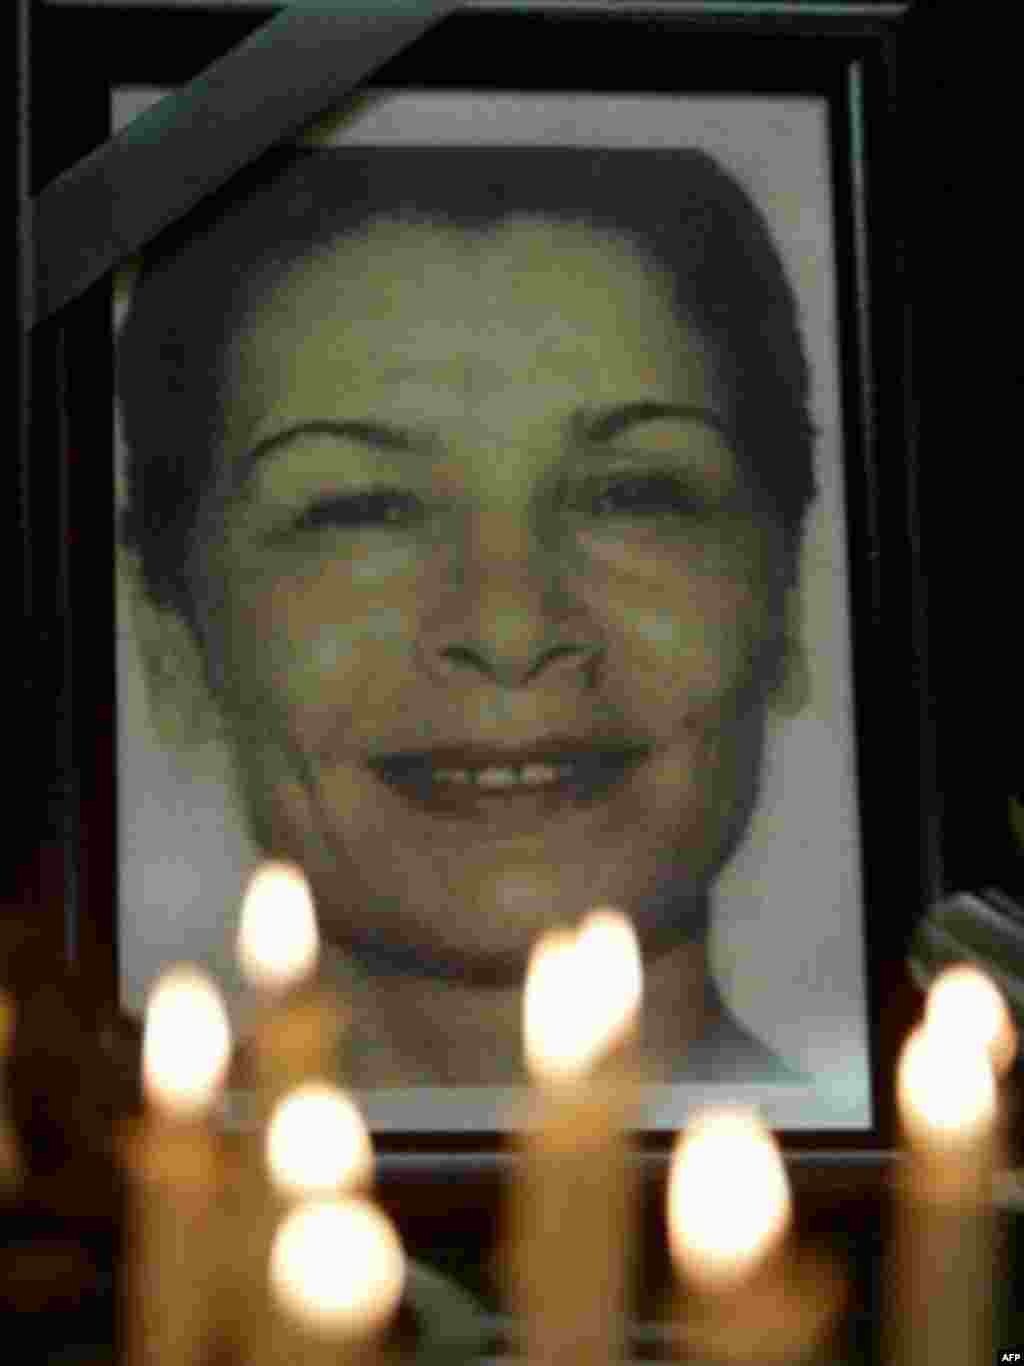 A deadly assignment (AFP) - Zahra Kazemi, an Iranian-Canadian journalist, died in custody in Evin in 2003 after being detained for taking photographs outside the jail. Authorities initially said she had died in an accidental fall; a doctor who later fled to Canada said she had been beaten and raped.